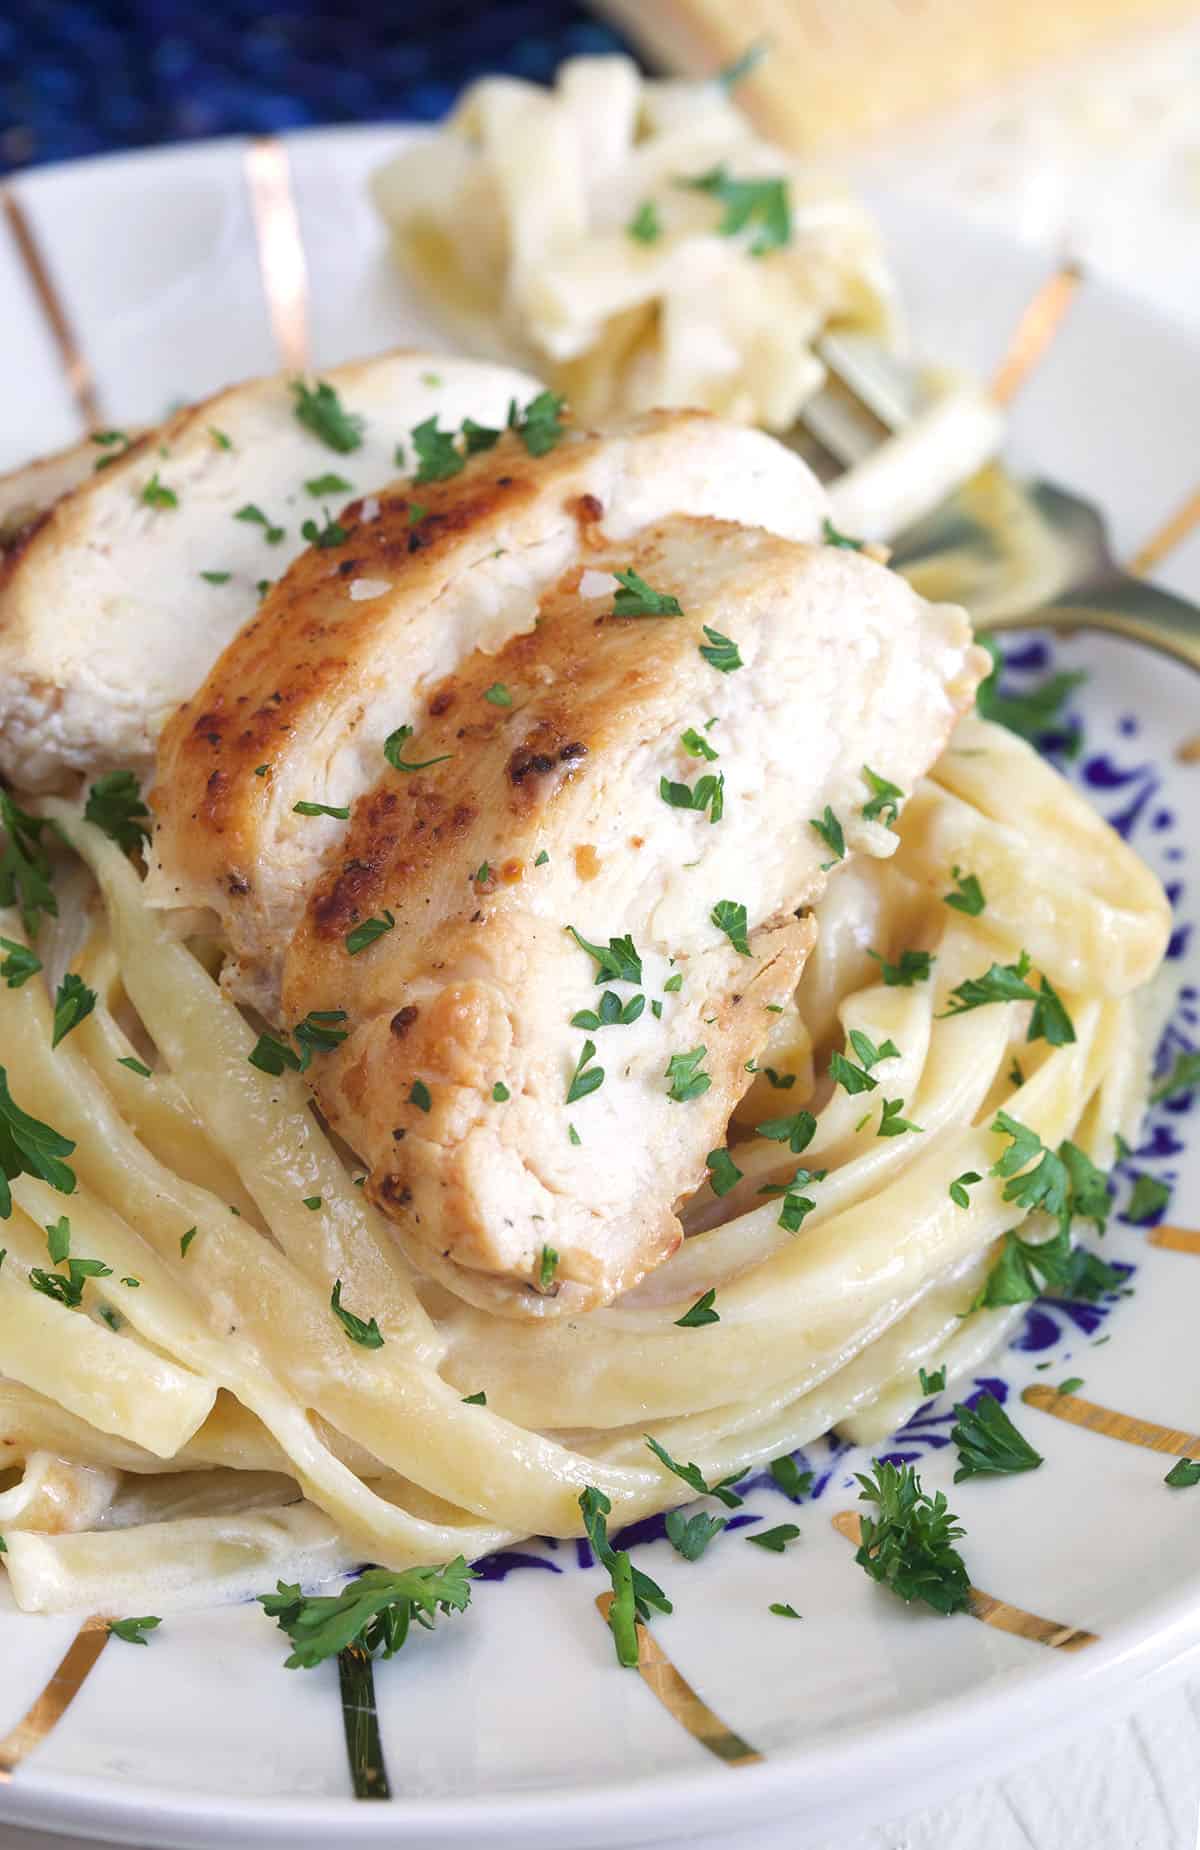 A pile of pasta is topped with cooked chicken breast slices.